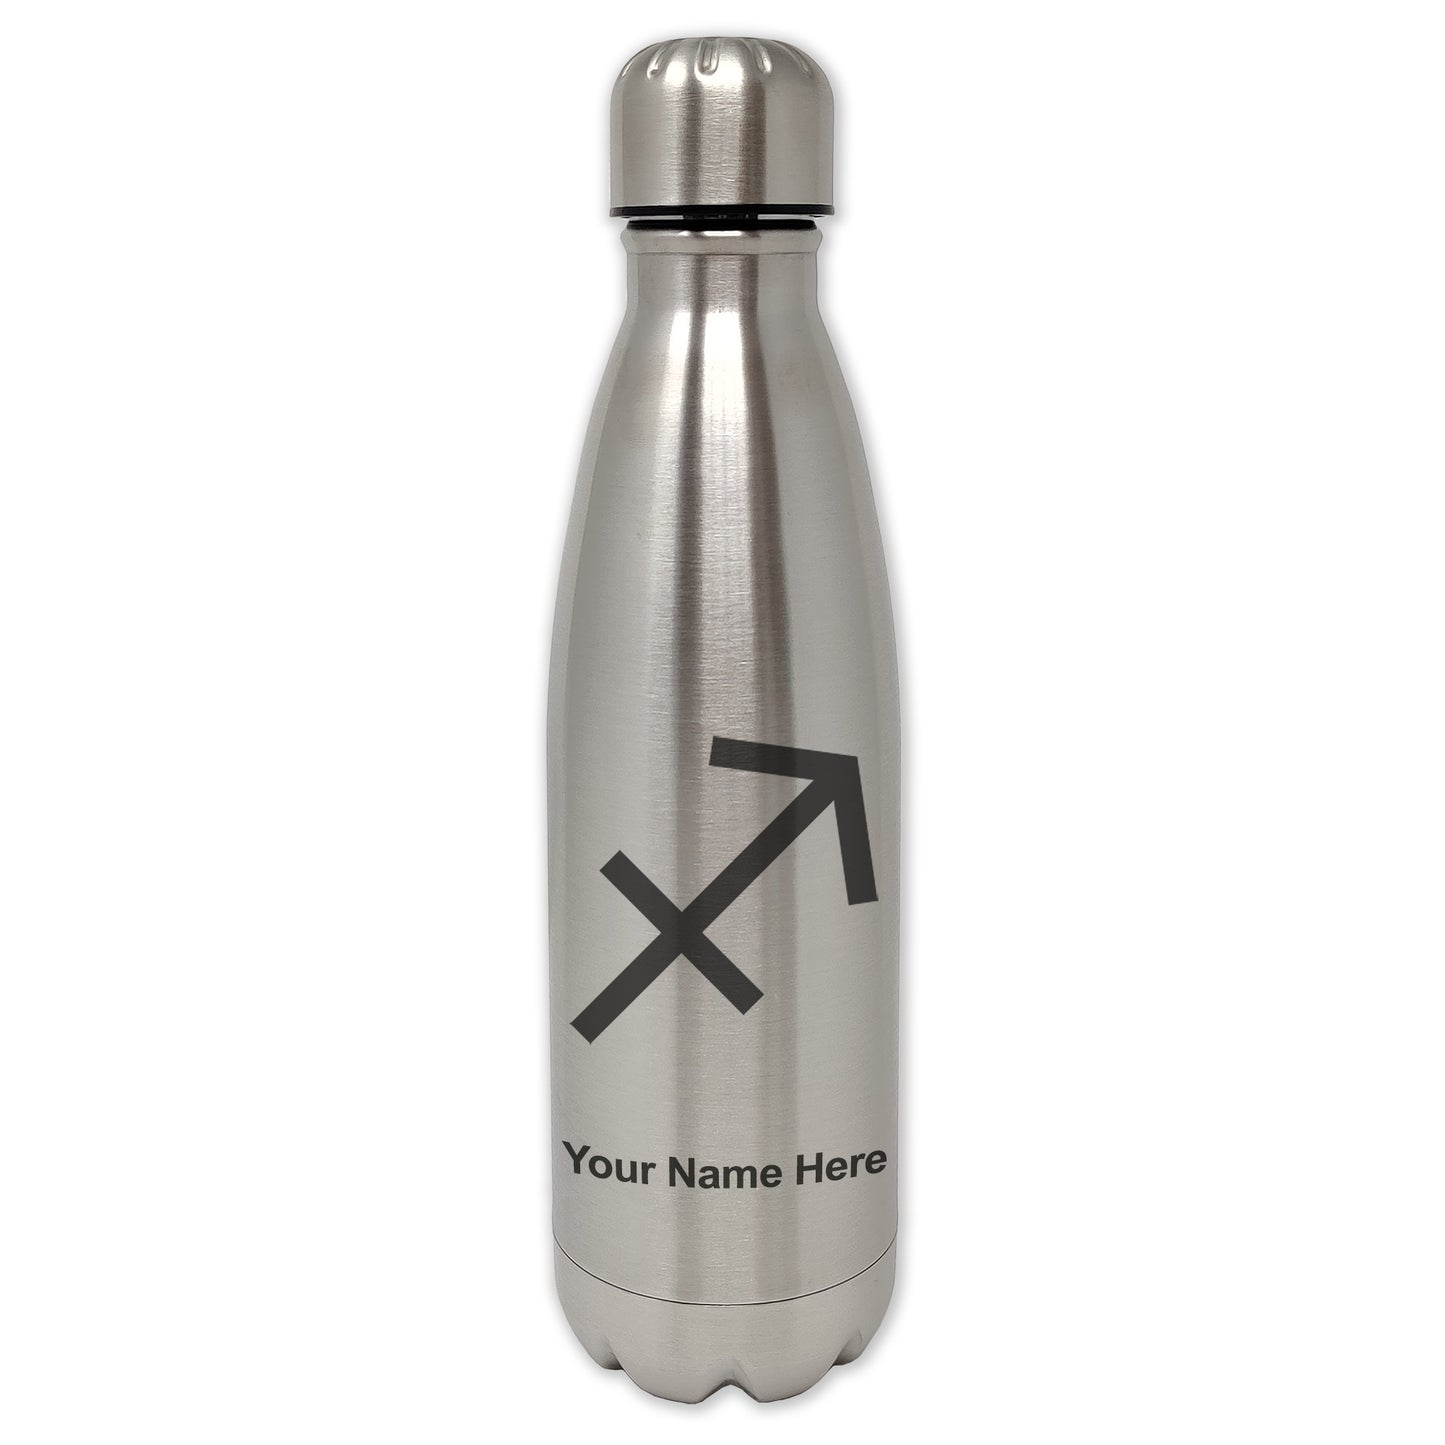 LaserGram Single Wall Water Bottle, Zodiac Sign Sagittarius, Personalized Engraving Included